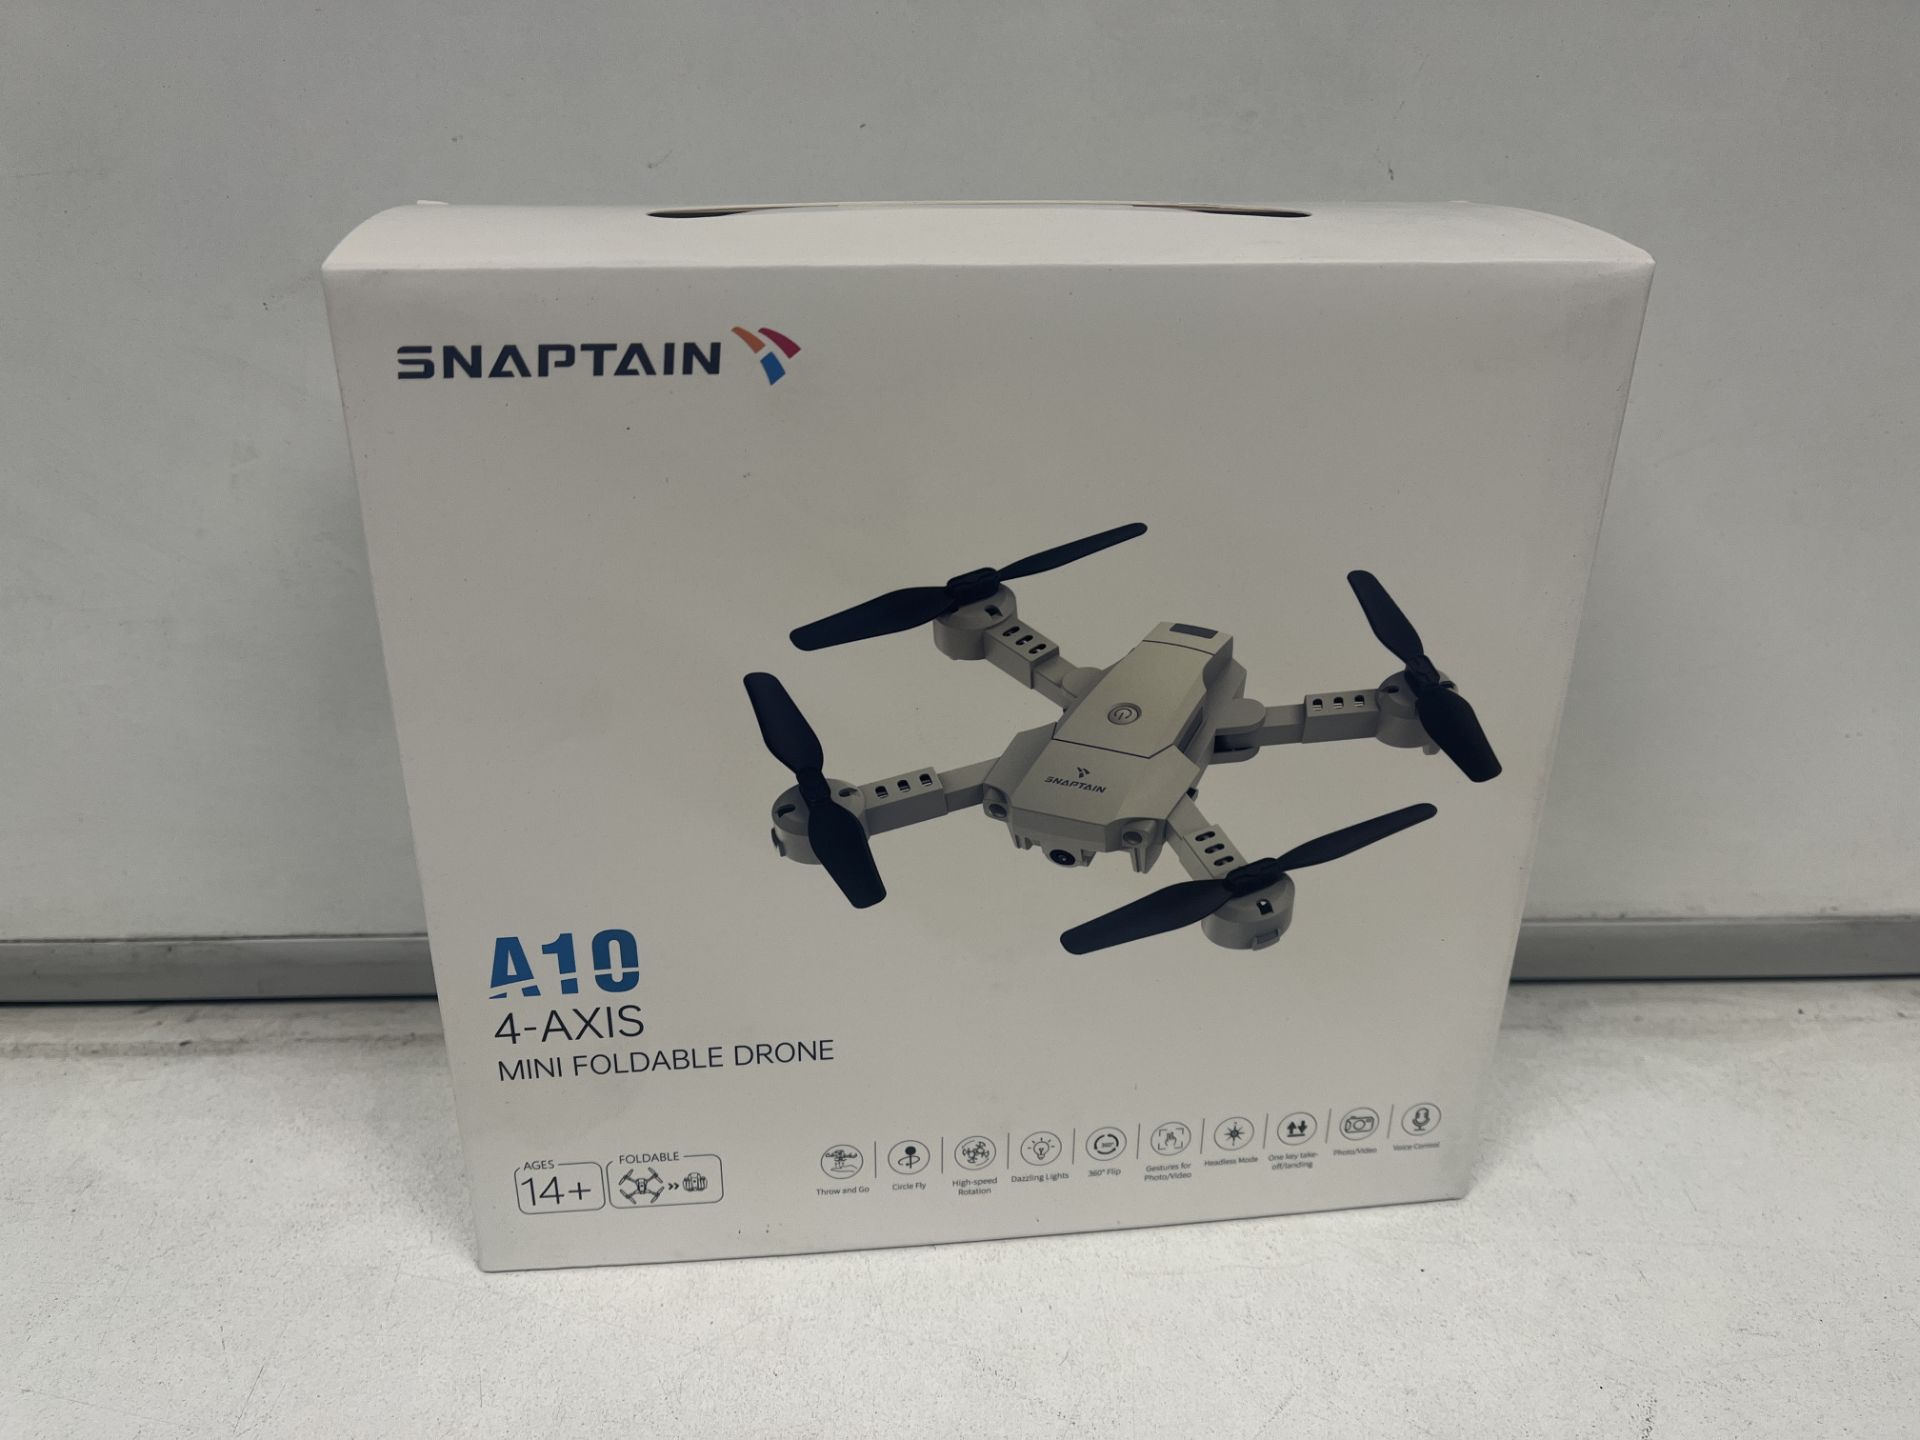 SNAPTAIN A10 4 AXIS MINI FOLDABLE DRONE